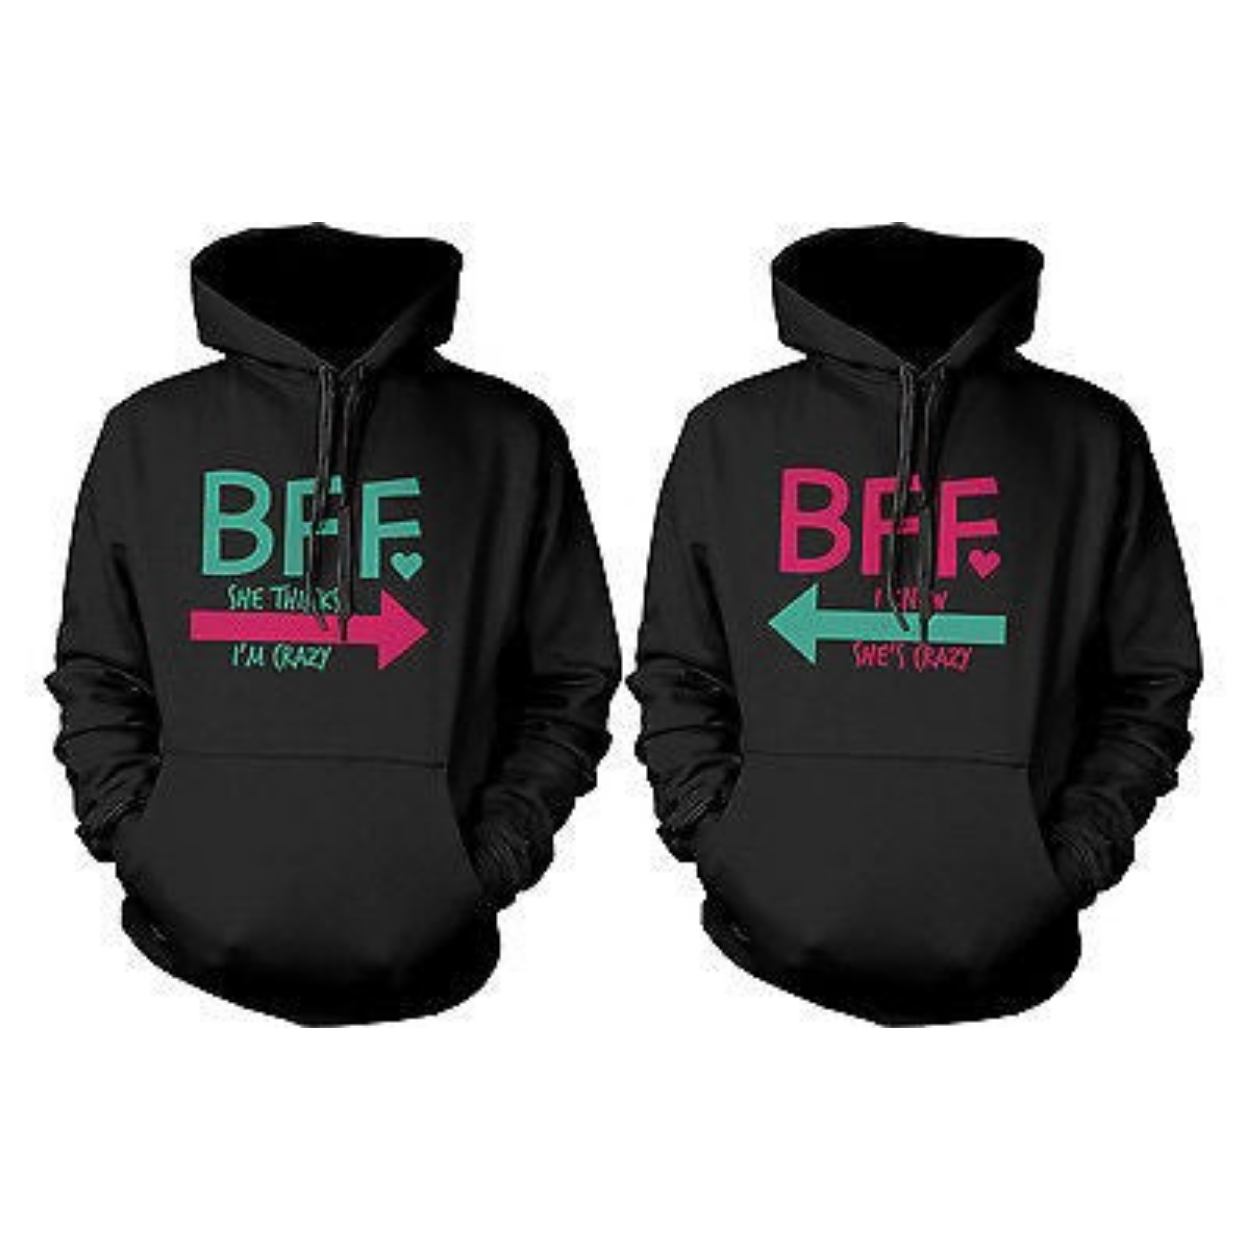 Crazy Bff Hoodies For Best Friends Funny Pullover Sweaters Great Gift - 365 In Love